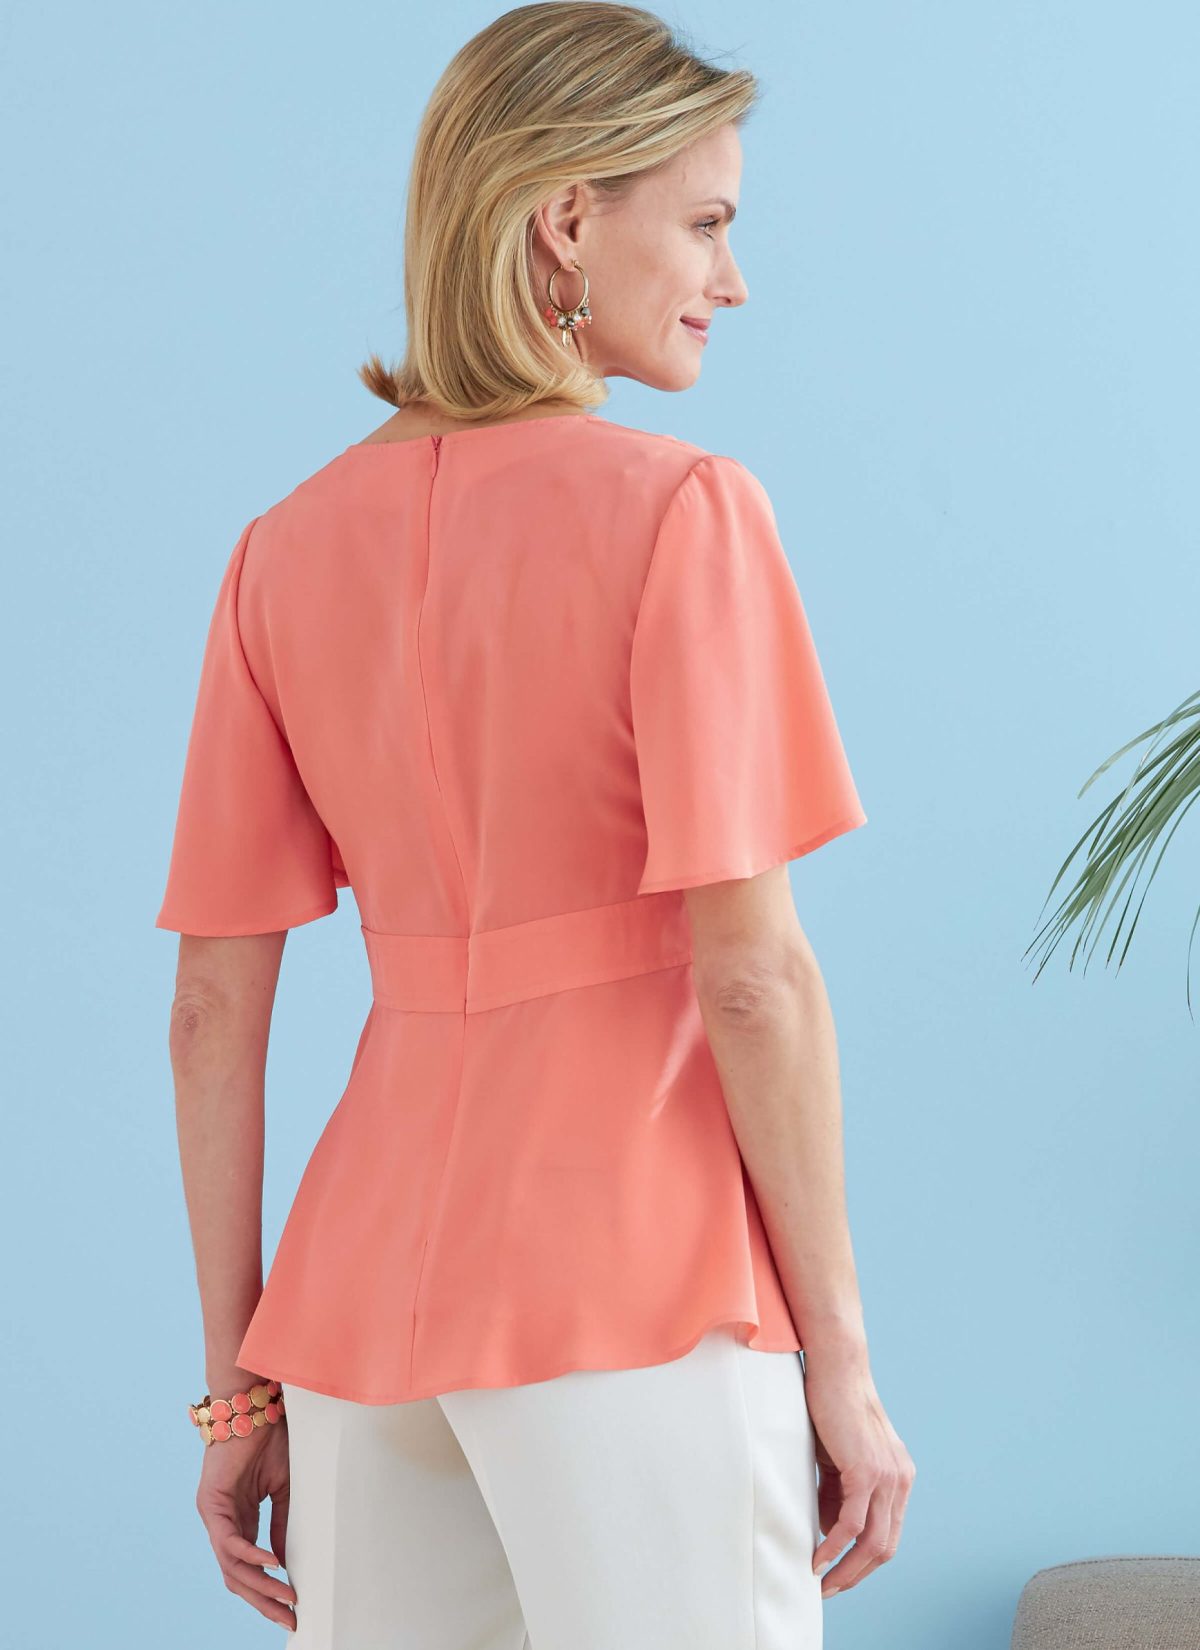 Butterick Sewing Pattern B6732 Misses' Top